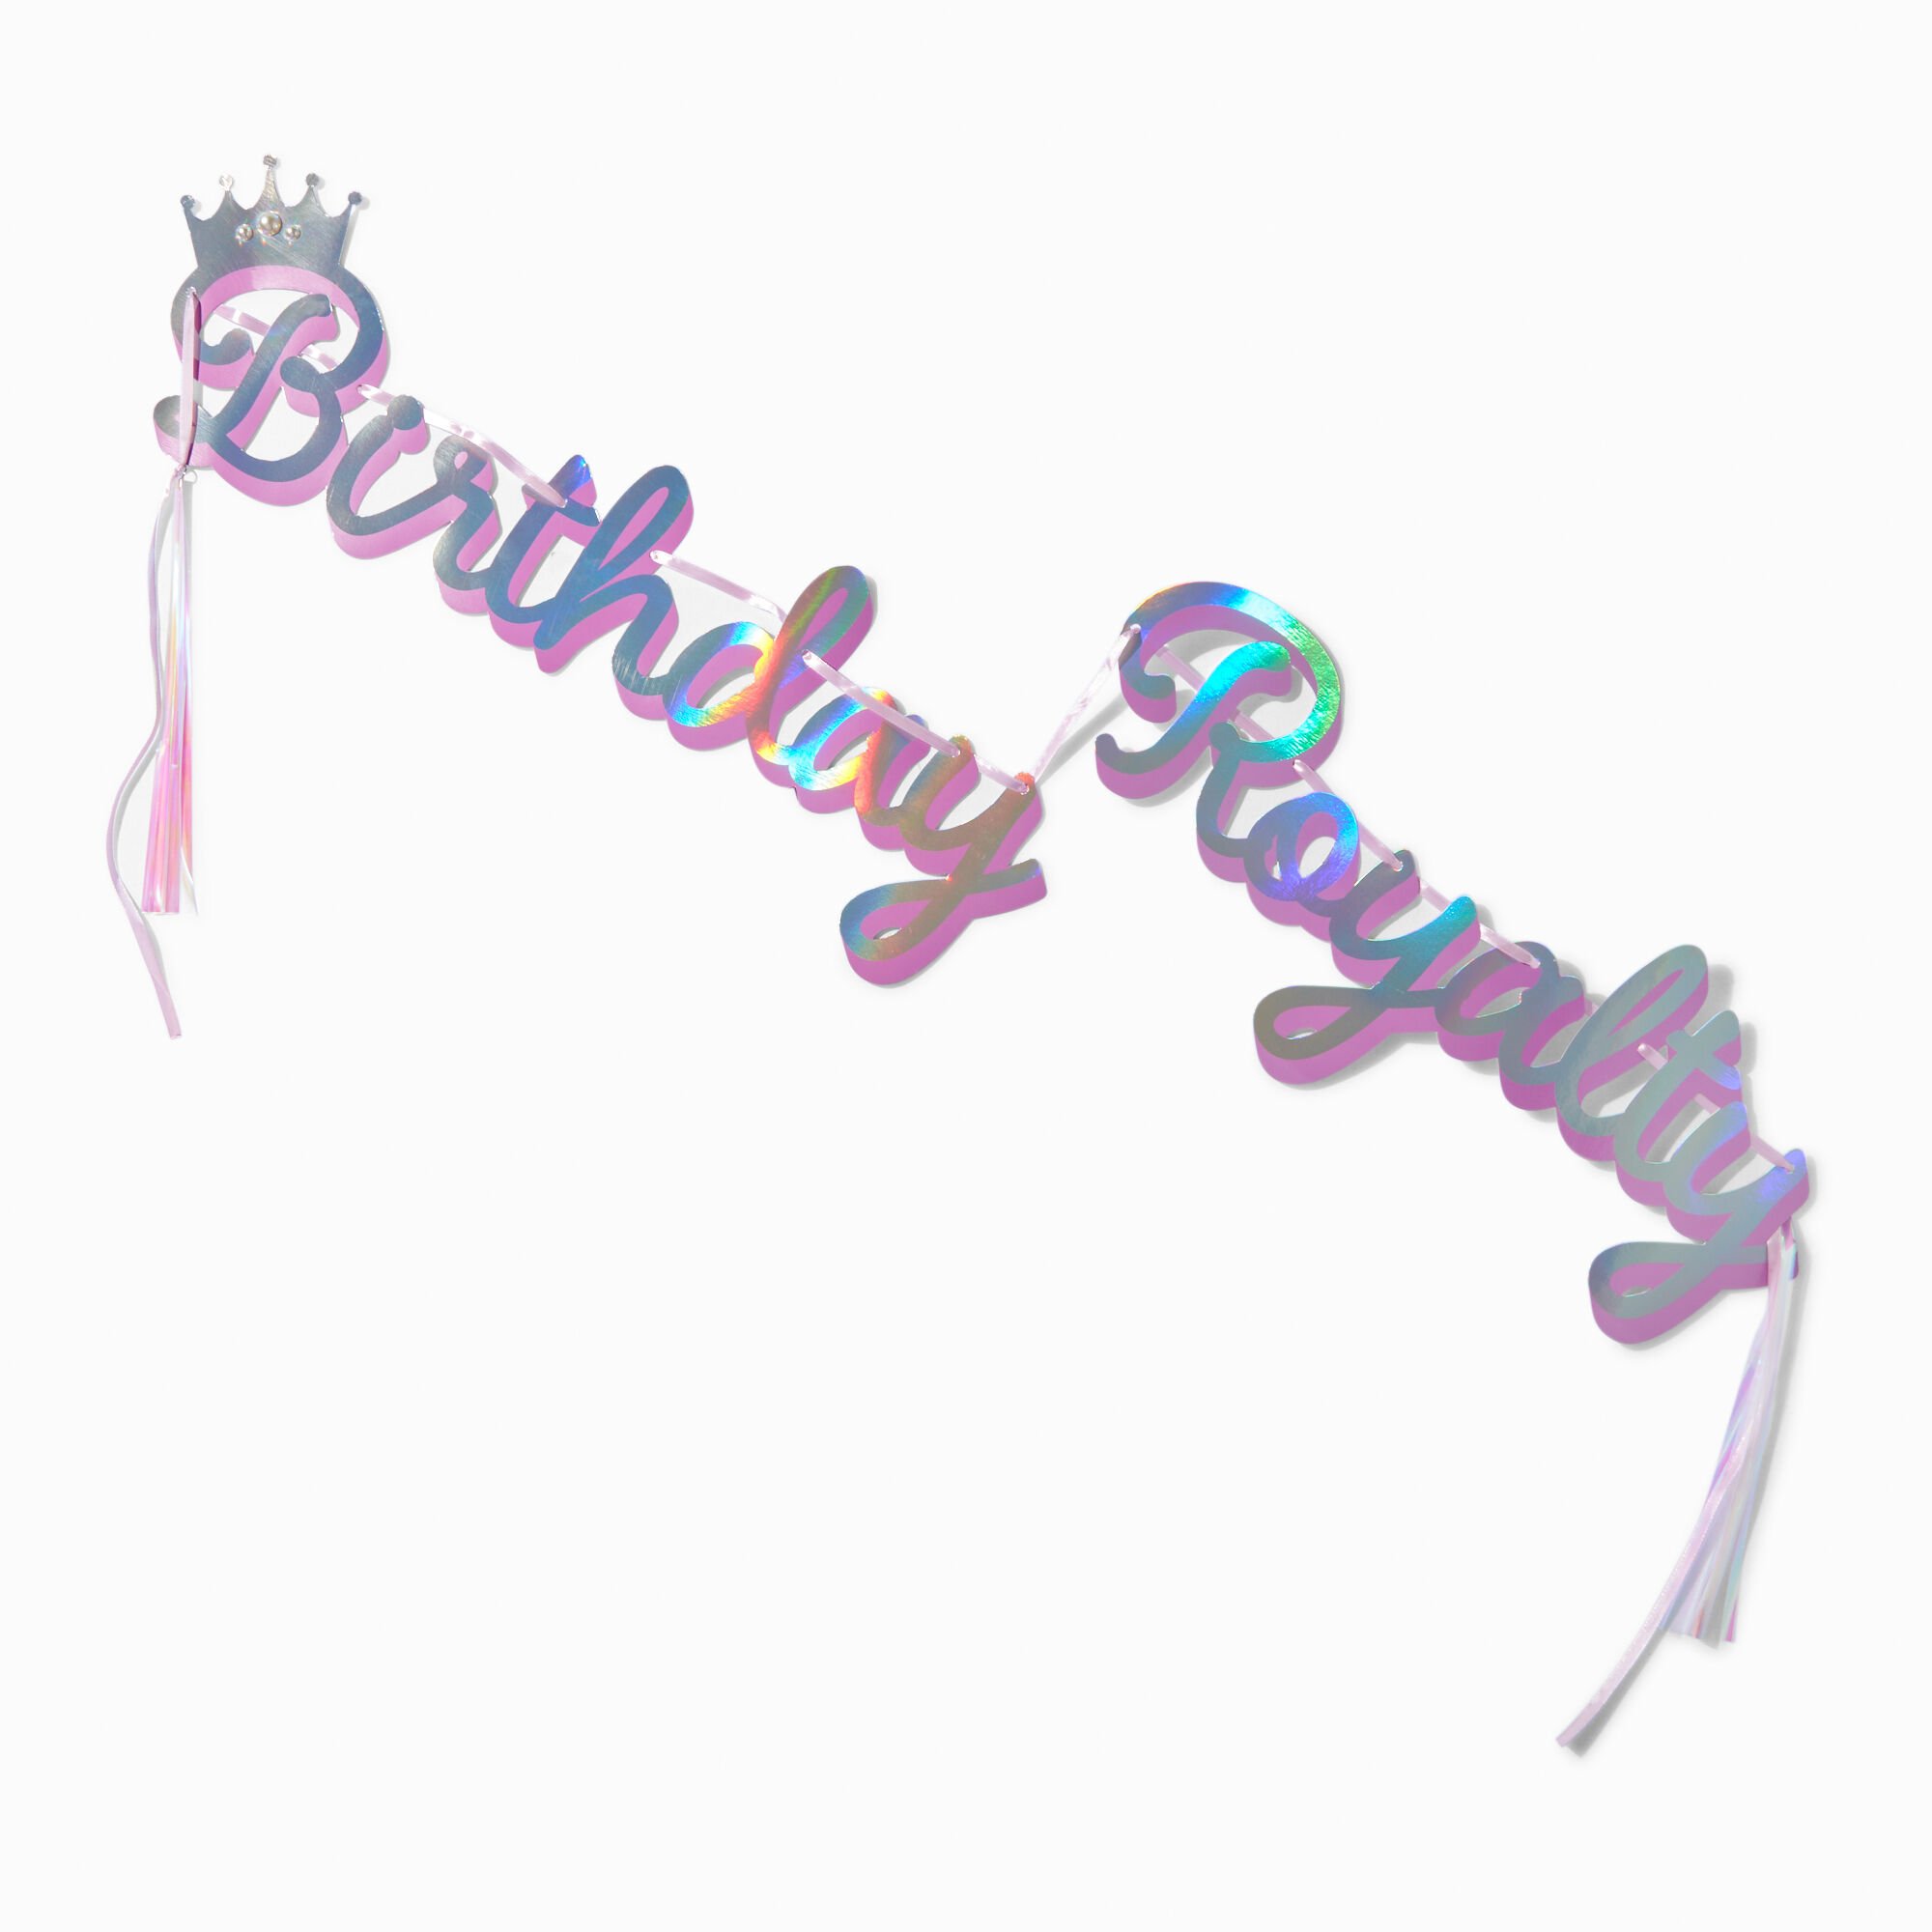 View Claires birthday Royalty Party Banner information